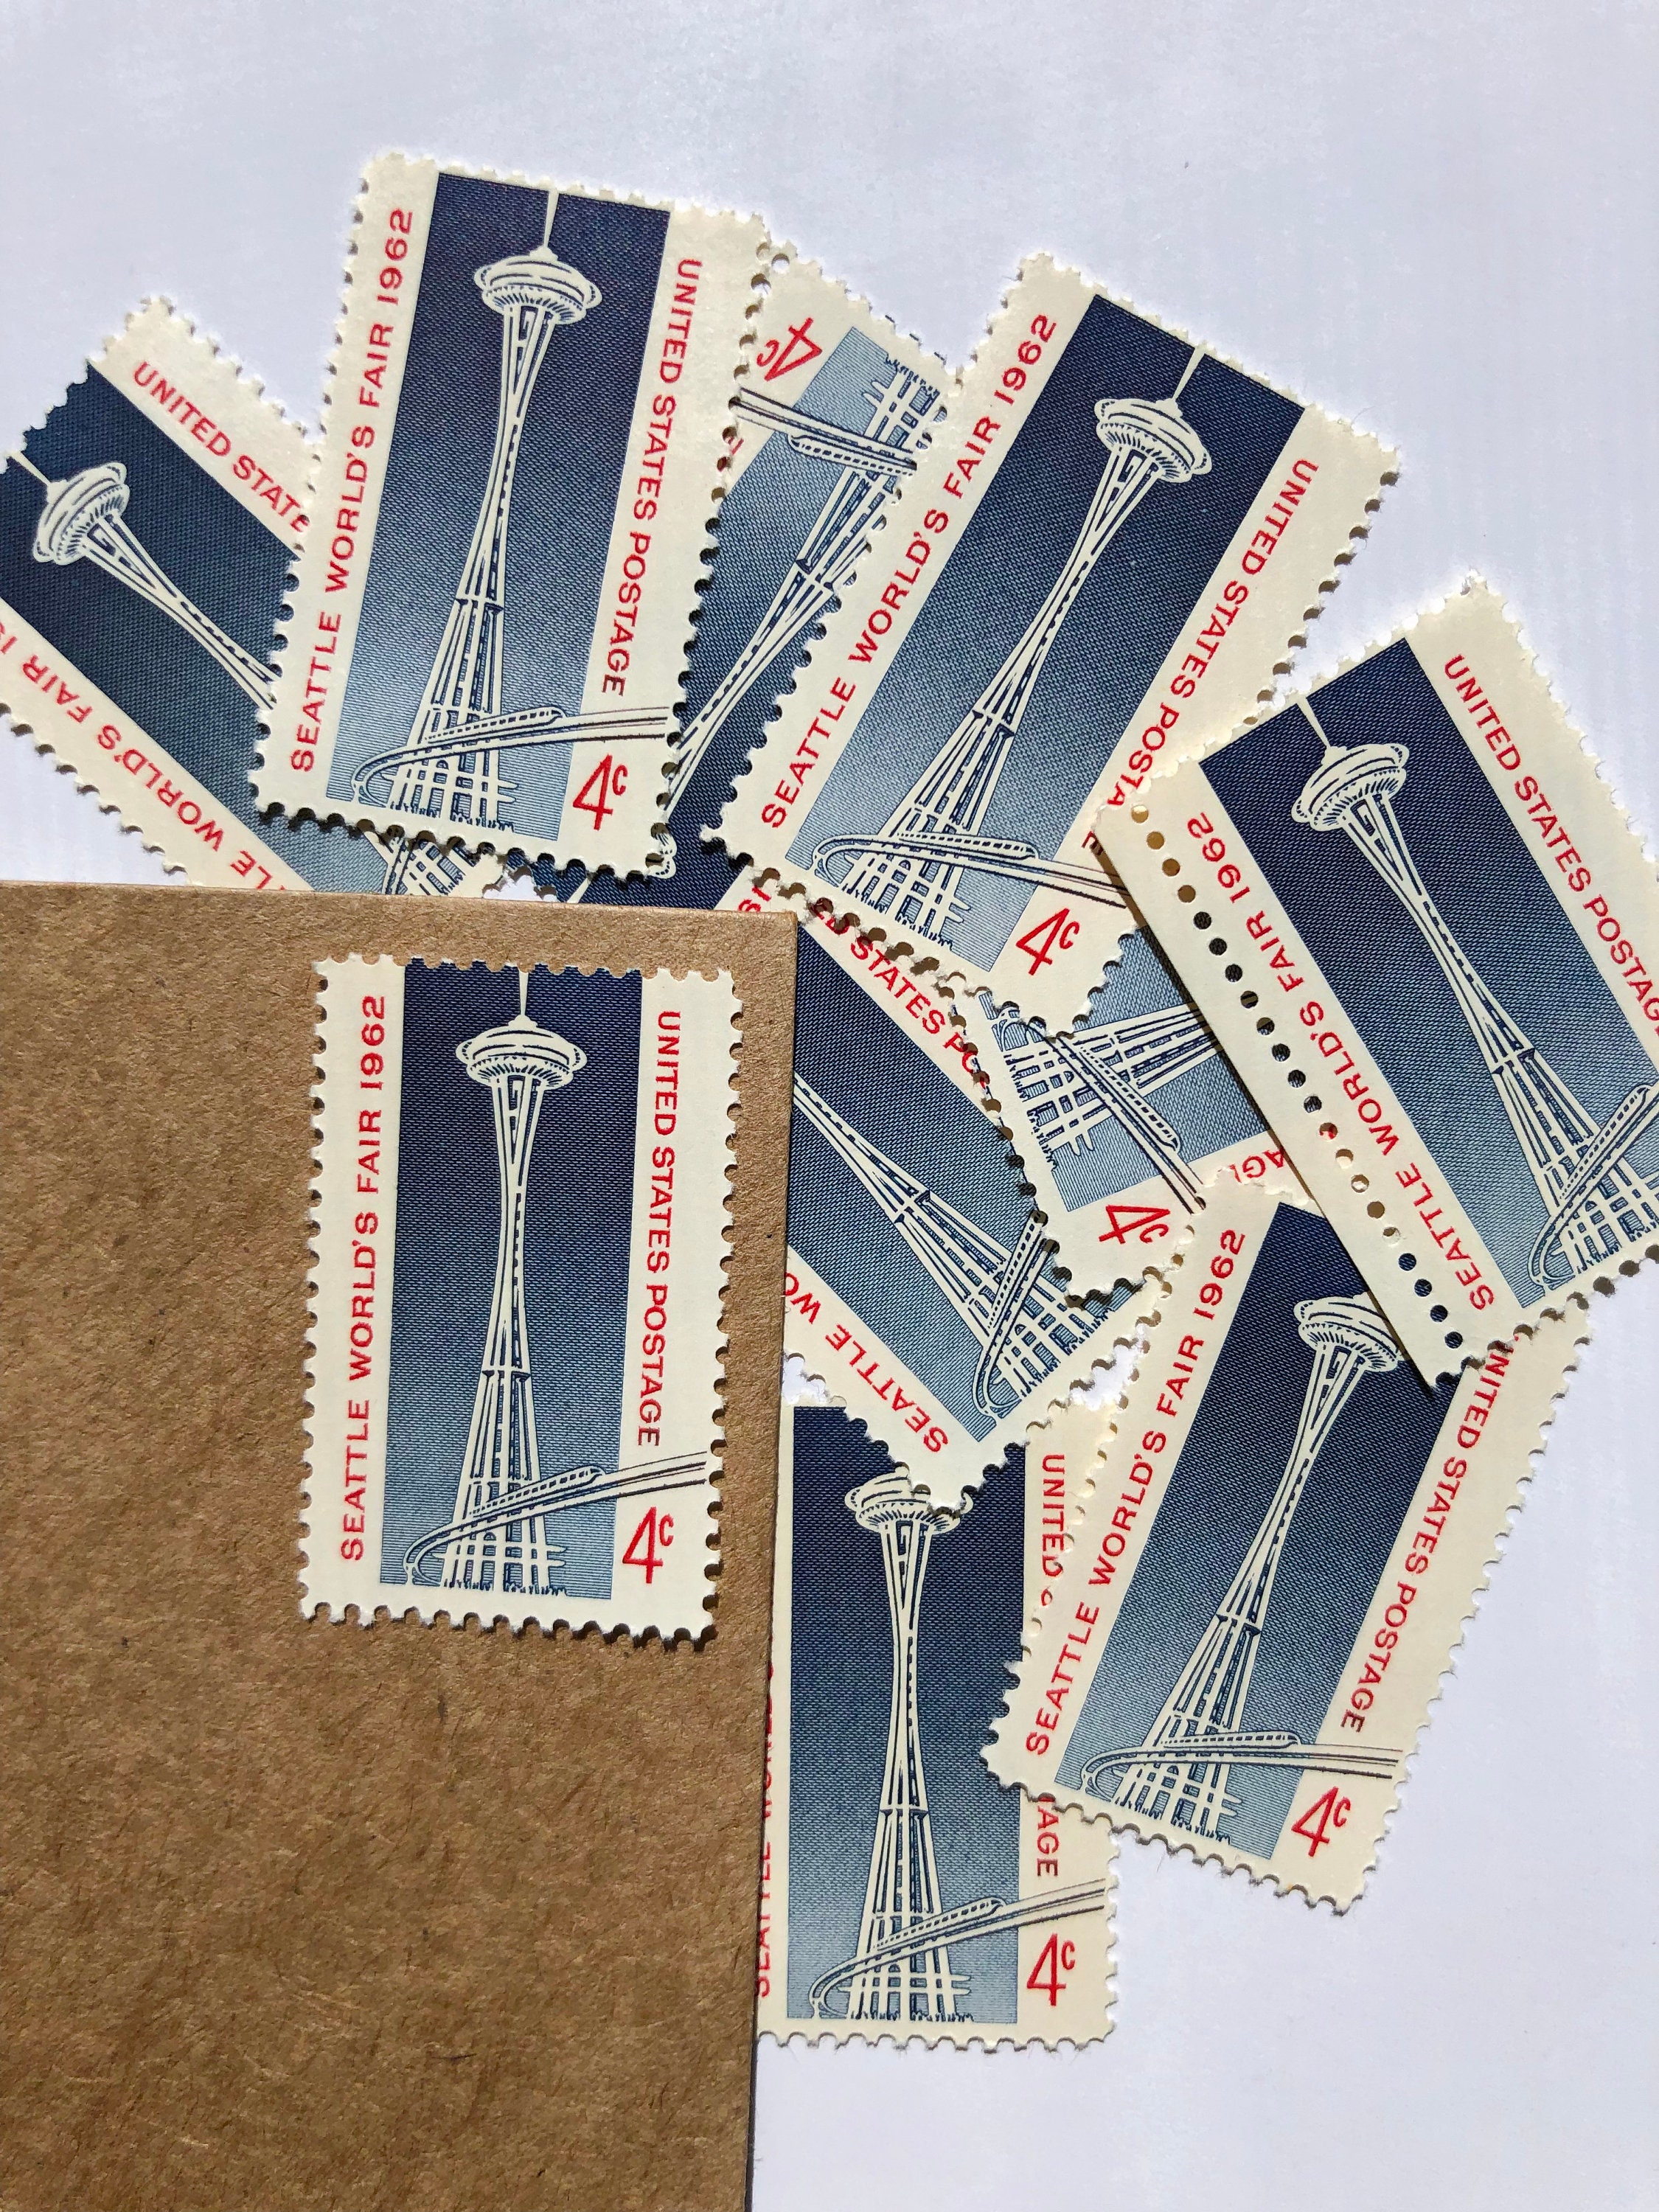 8 Cent Statue of Liberty Stamp Issued 1956 .. Vintage Unused US Postage  Stamp .. Pack of 10 